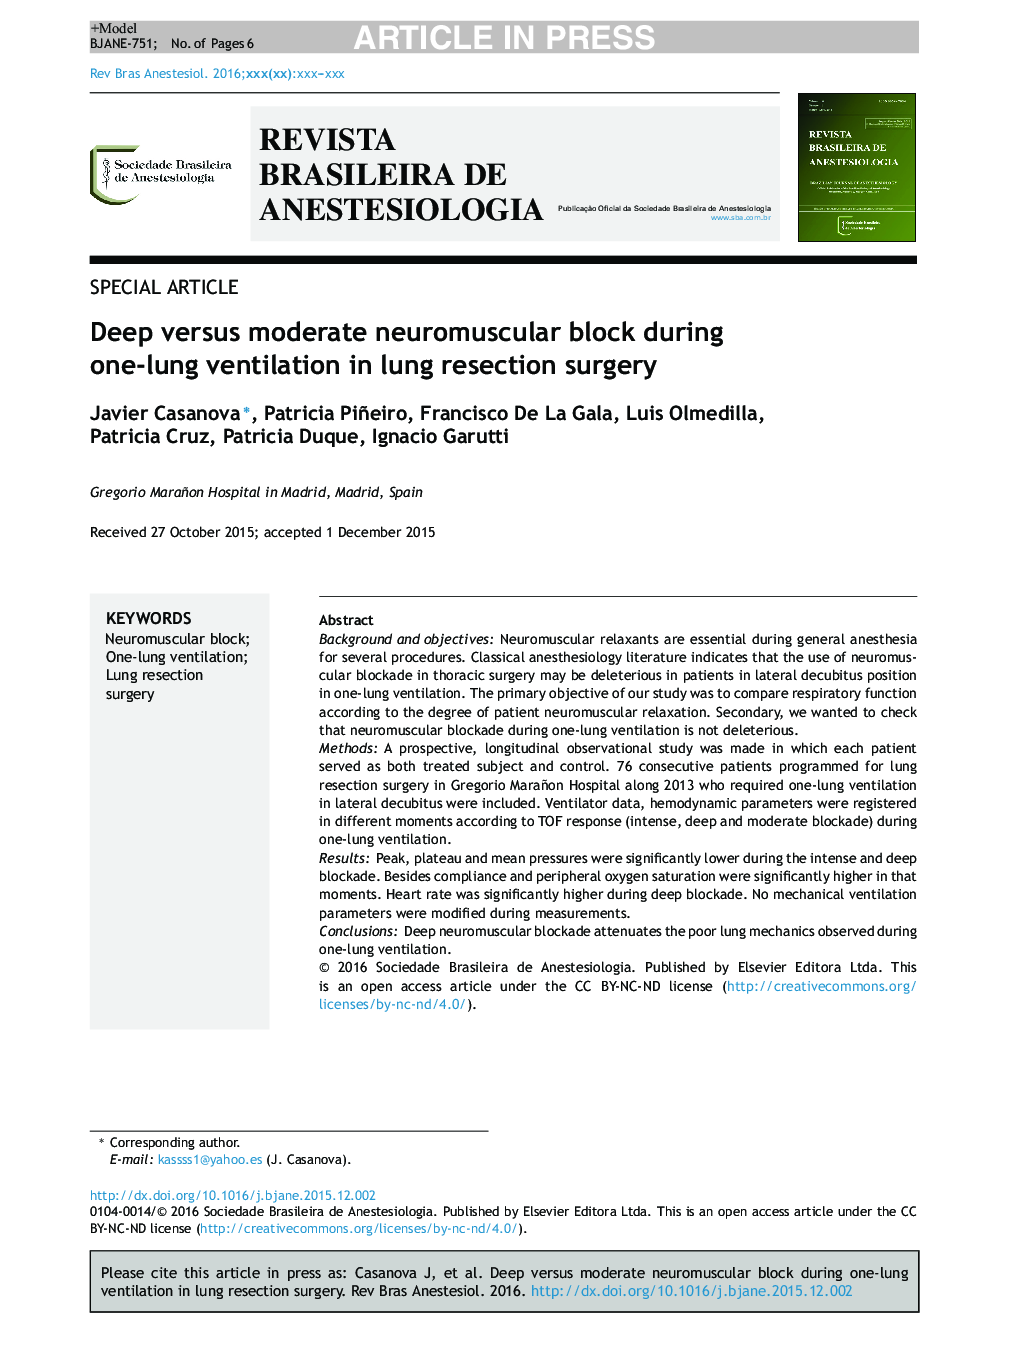 Deep versus moderate neuromuscular block during one-lung ventilation in lung resection surgery